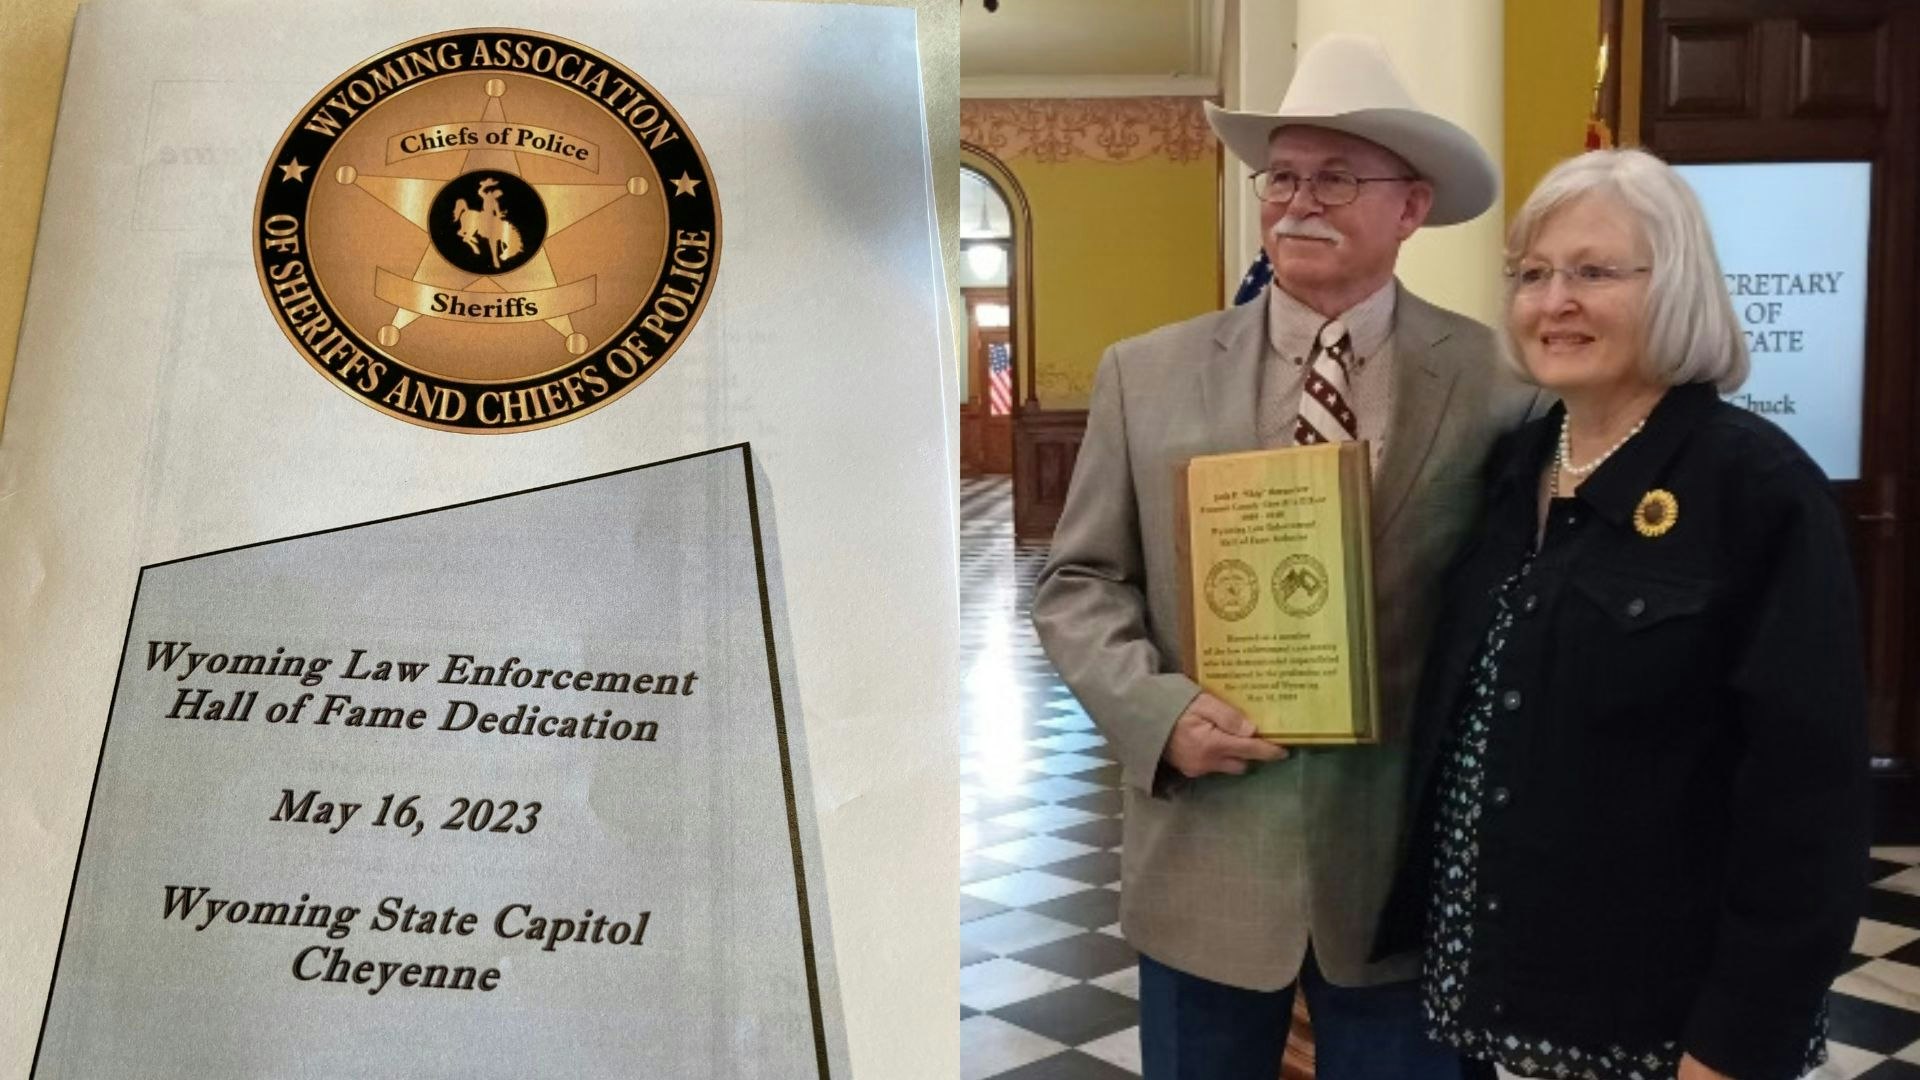 A long law enforcement career culminated last week with induction into the Wyoming Law Enforcement Hall of Fame. He credits his wife of 48 years, Margie, for much of his success.